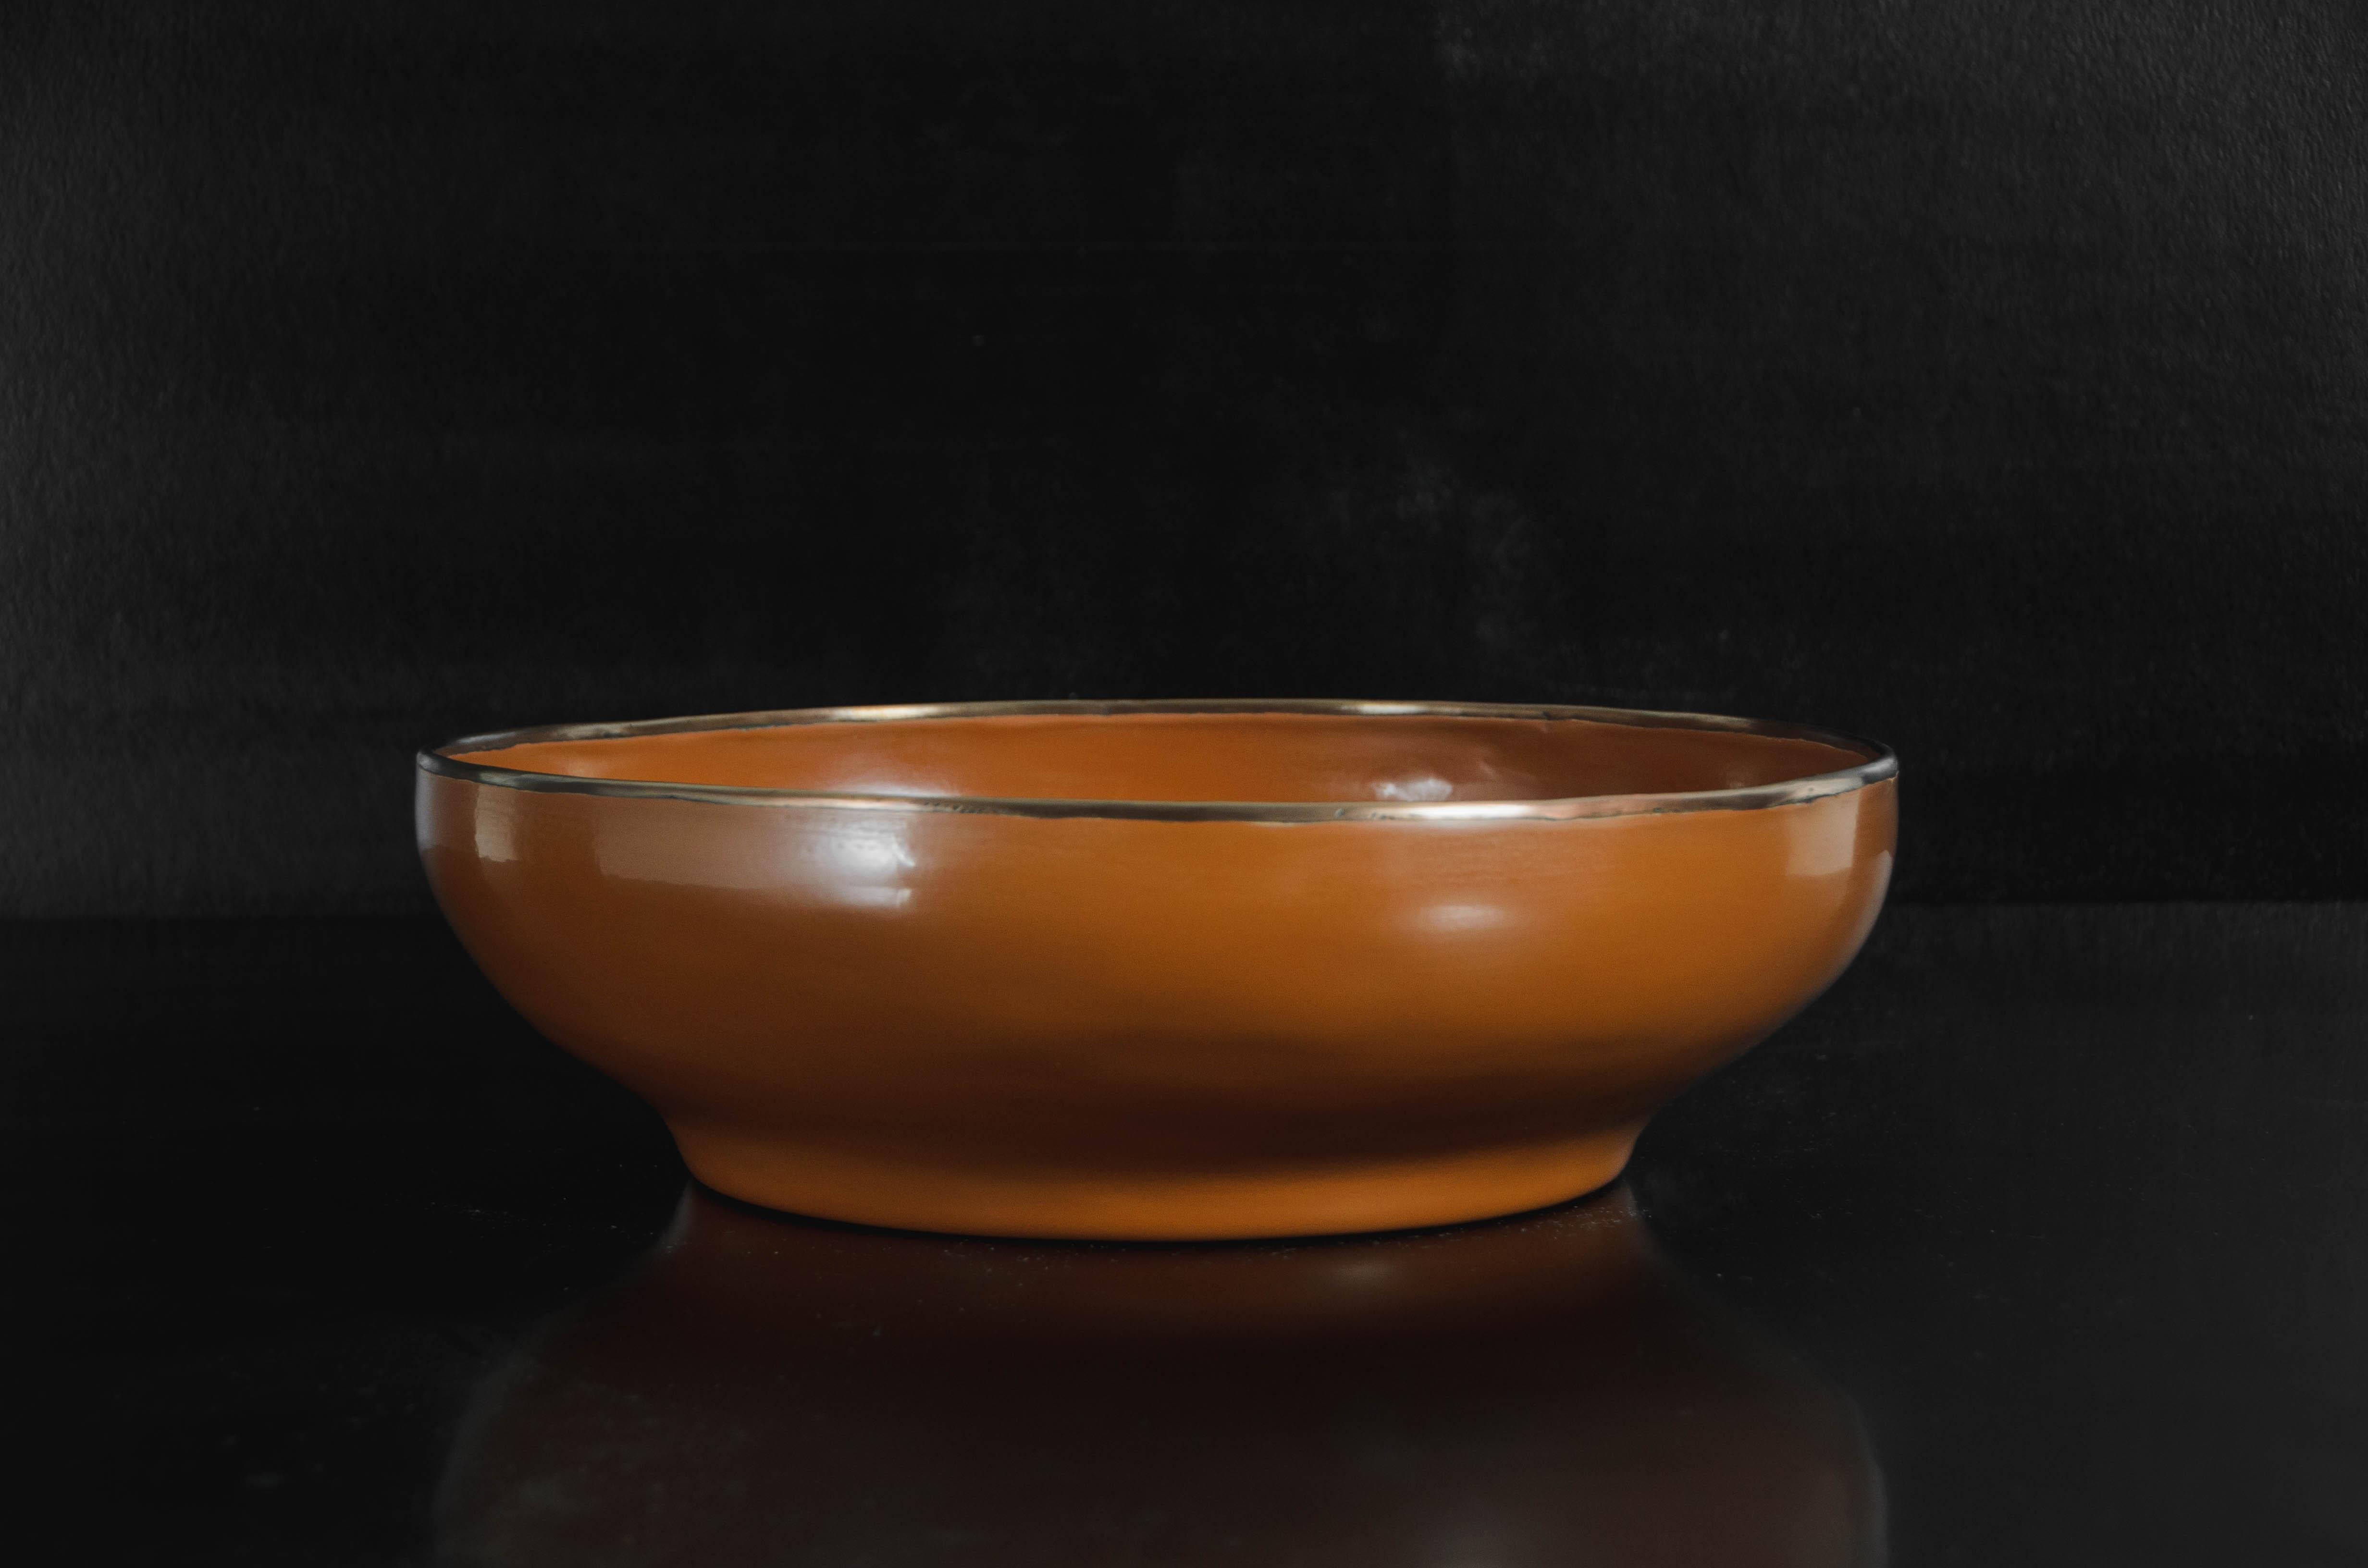 Repoussé Contemporary Large Footed Bowl W/ Copper Rim in Mila Lacquer by Robert Kuo For Sale